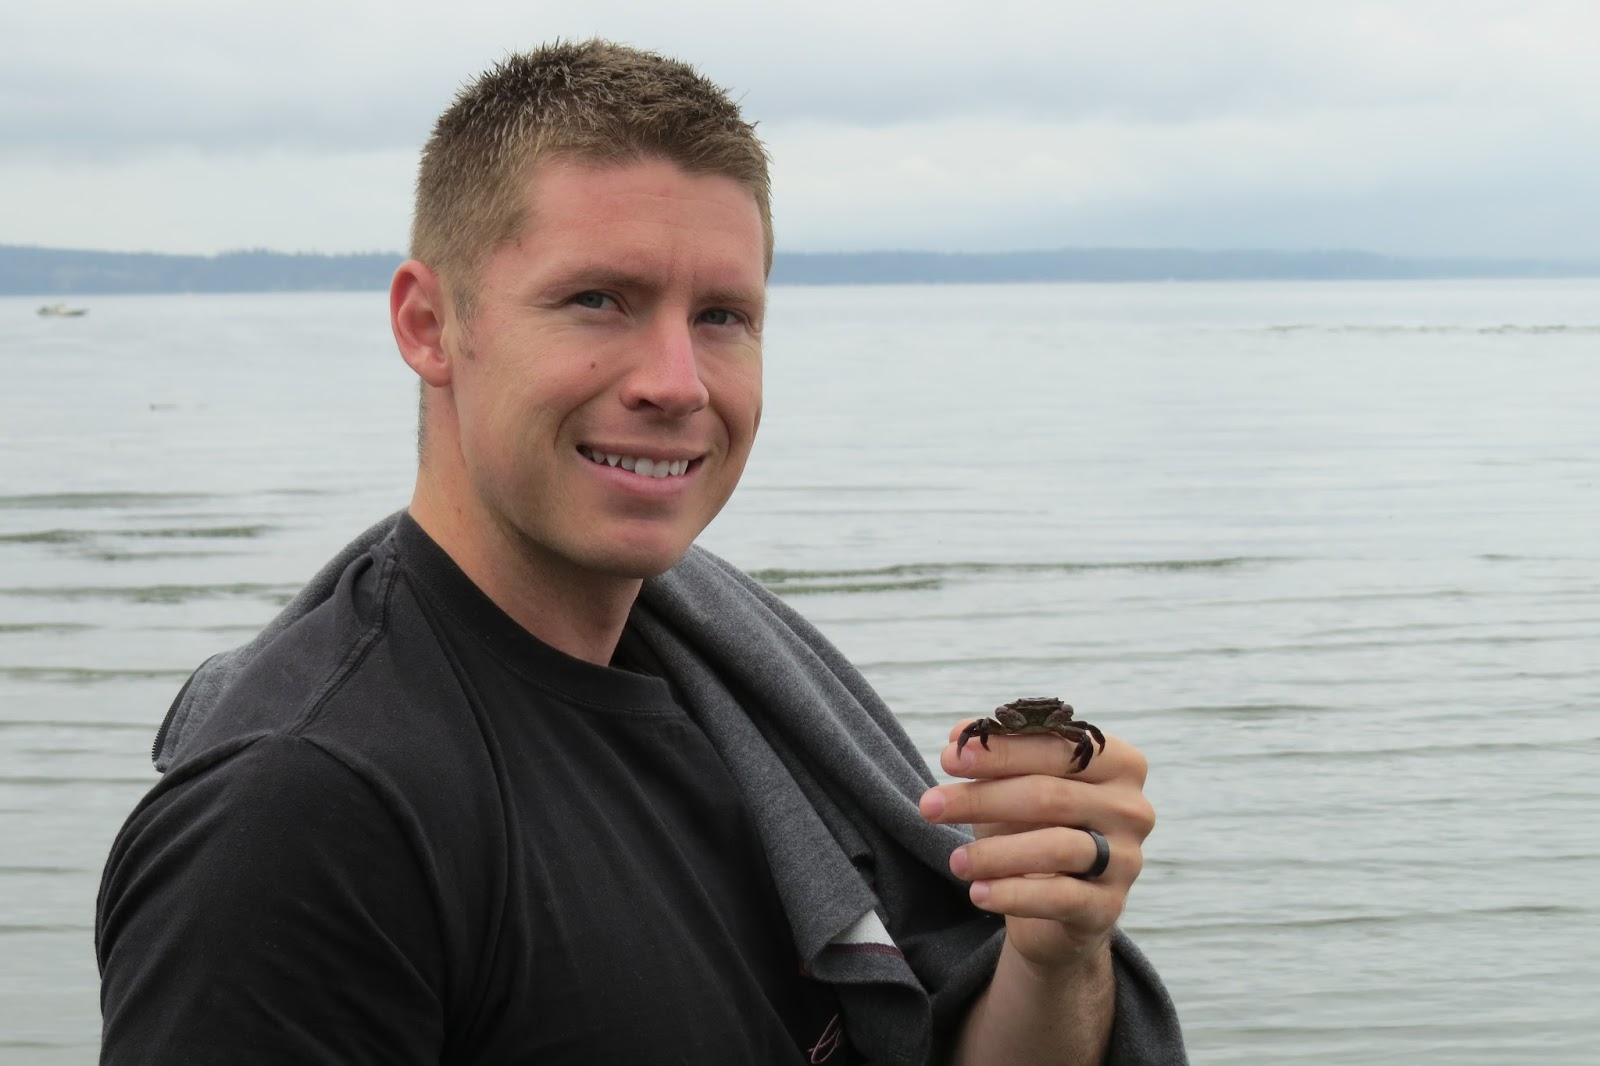 Finding crabs on Maxwelton Beach on Whidbey Island